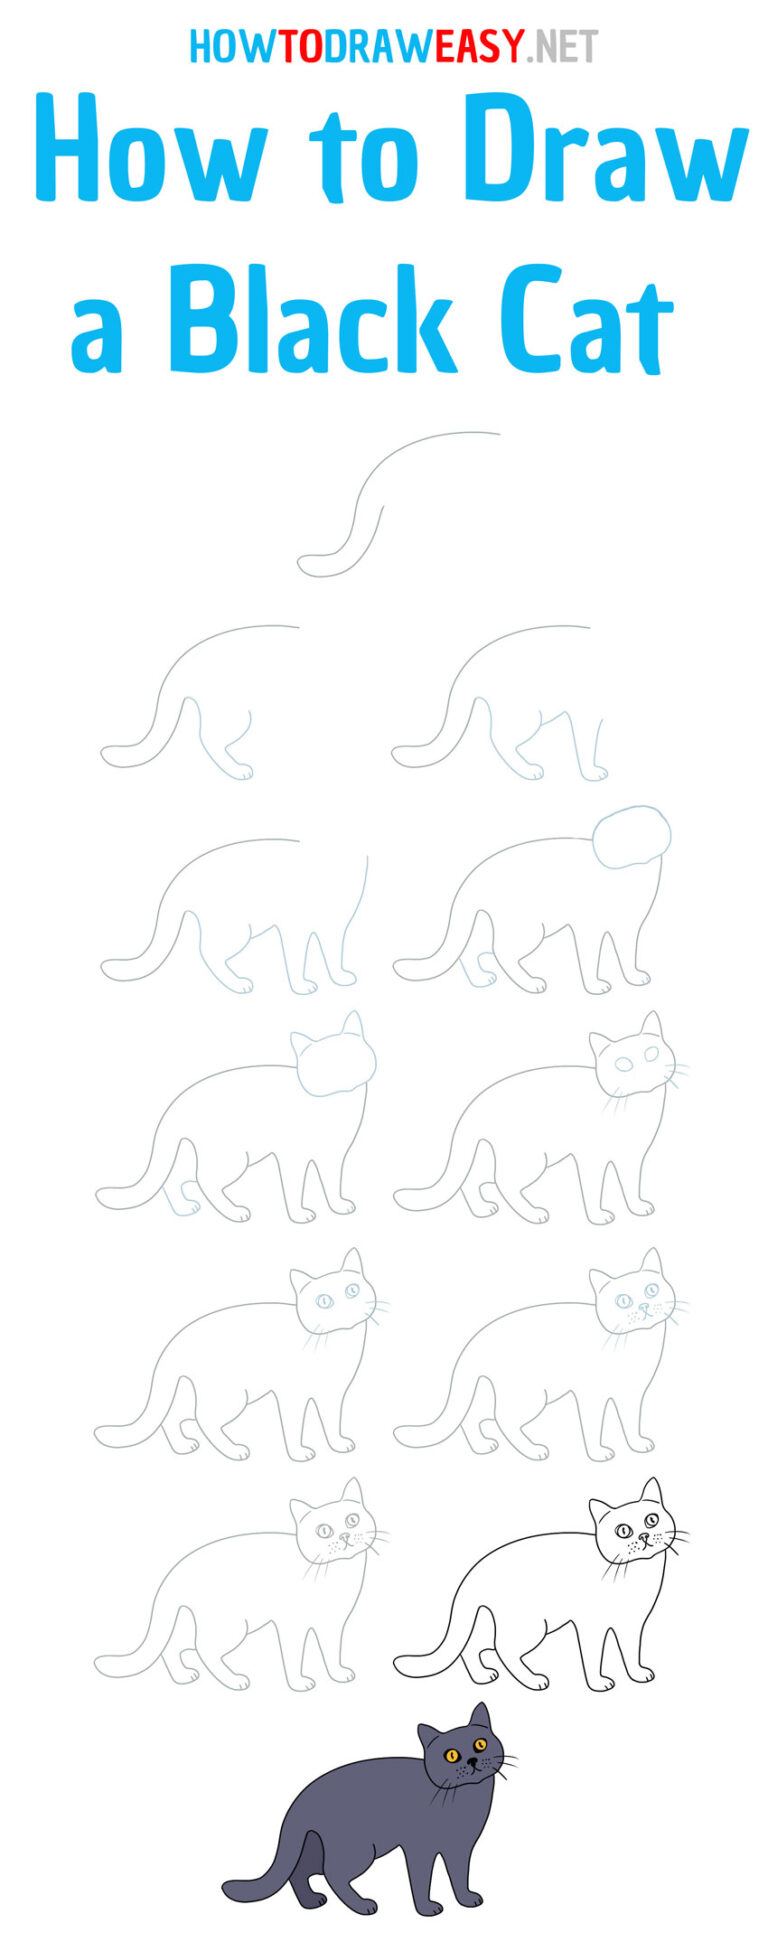 How to Draw a Black Cat How to Draw Easy